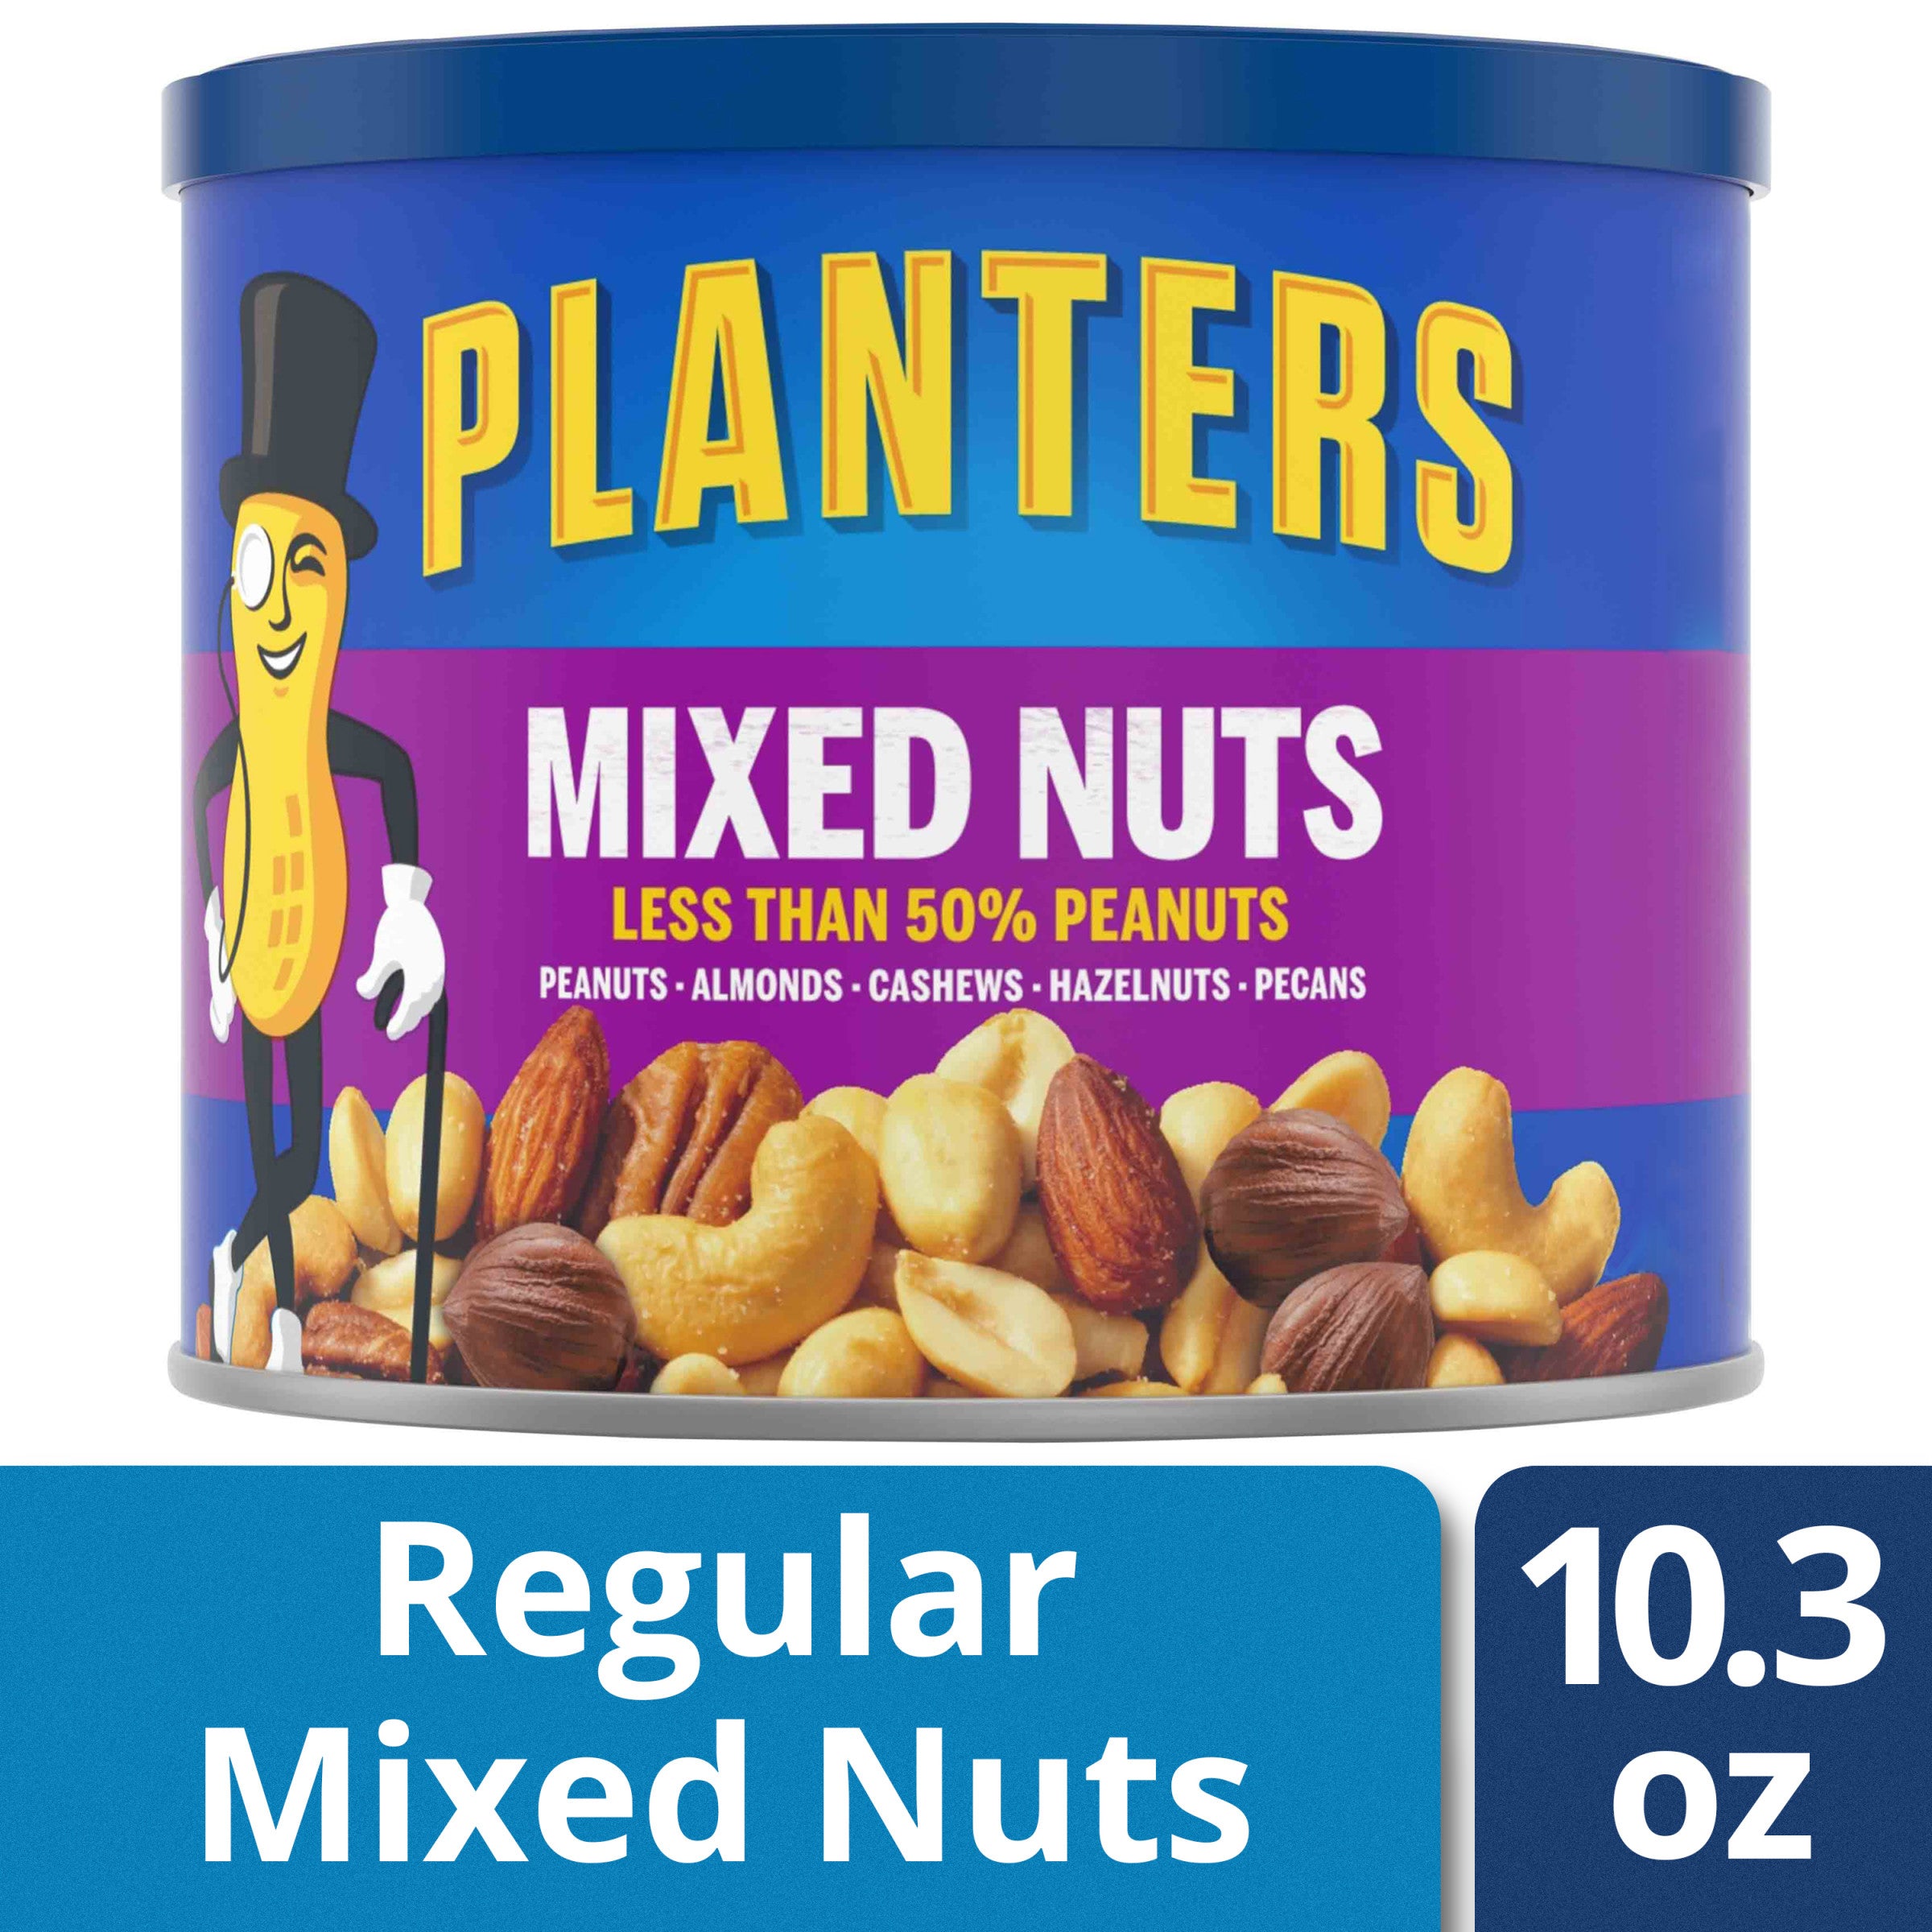 Planters Mixed Nuts, 10.3 oz Canister